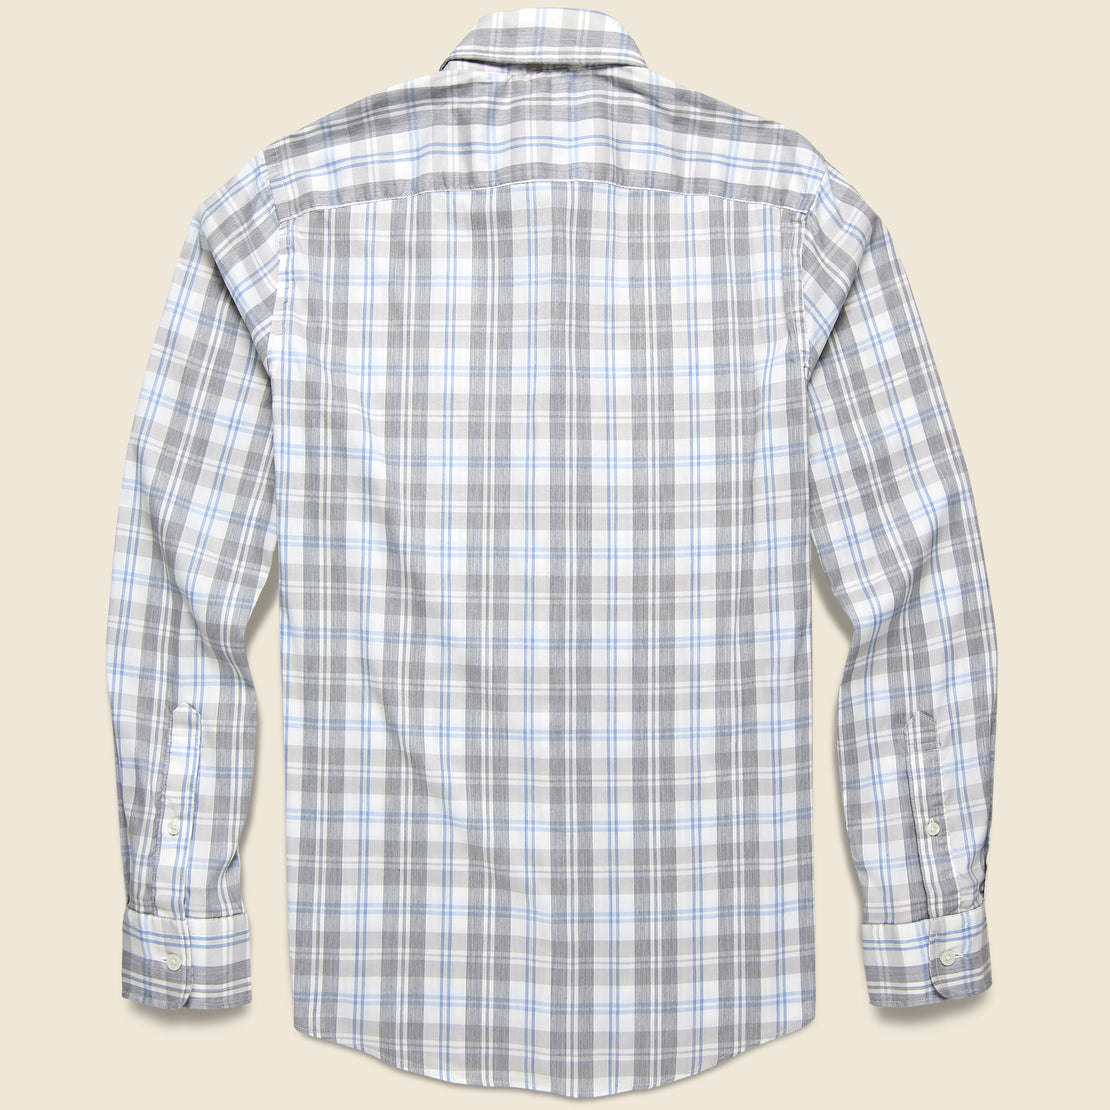 Movement Shirt - Grey Cream Plaid - Faherty - STAG Provisions - Tops - L/S Woven - Plaid